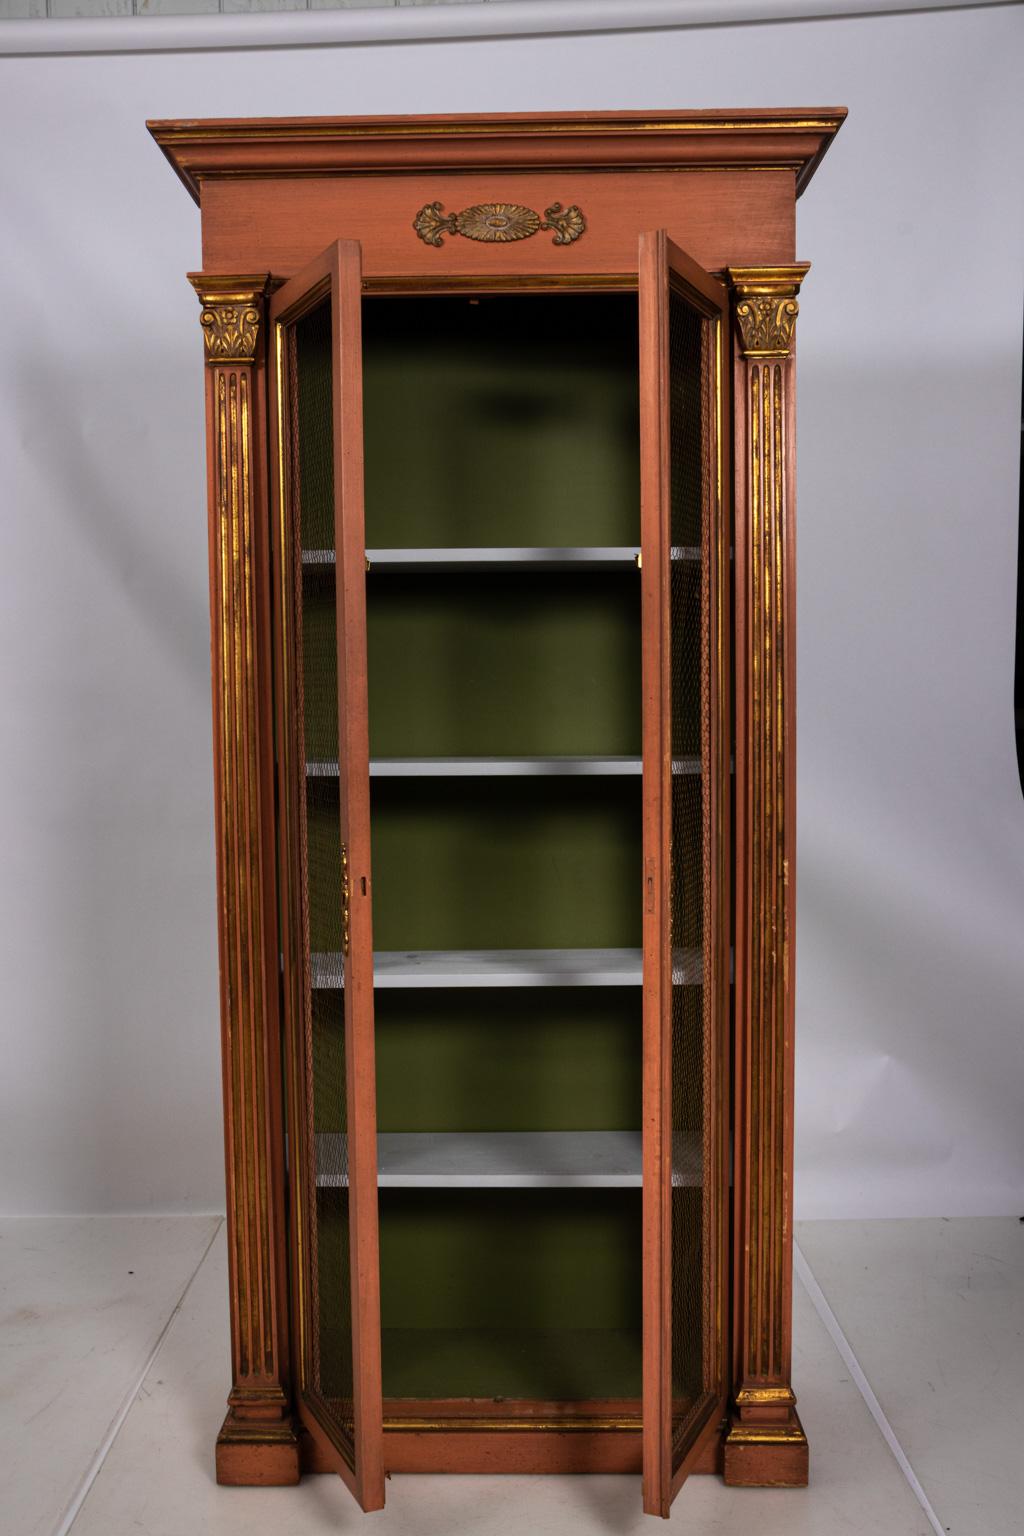 Neoclassical style large scale painted Folk Art display cabinet from a pocket knife store, circa 1950s. Fully opens and closes with multiple shelves. Please note of wear consistent with age including damage to metal screen, minor oxidation, and